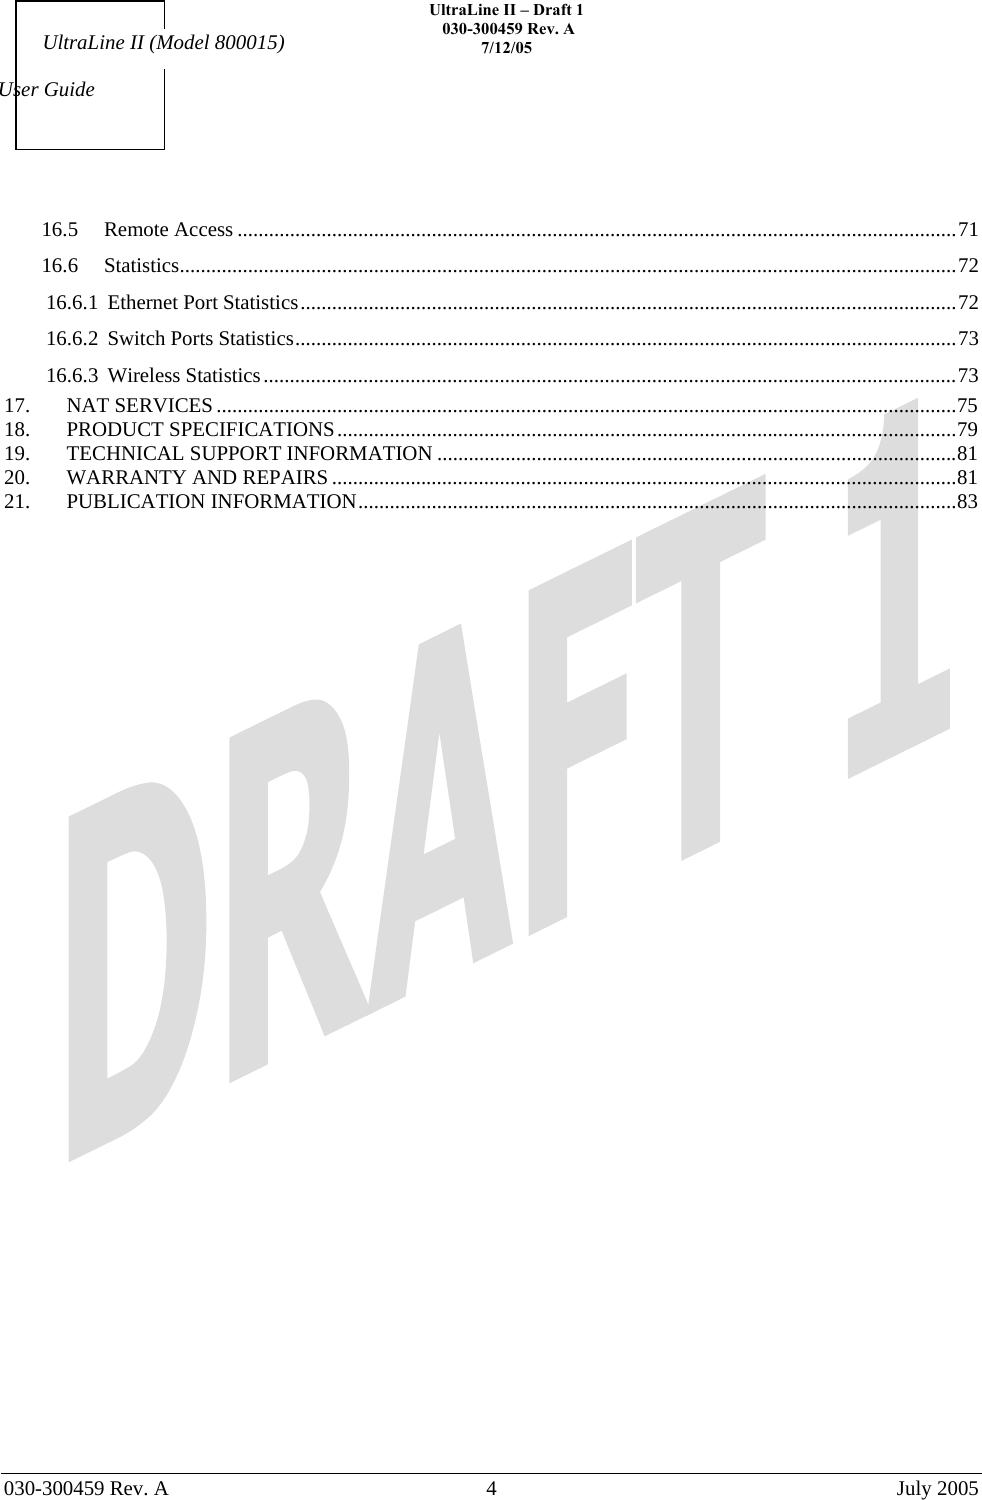    UltraLine II – Draft 1   030-300459 Rev. A 7/12/05     030-300459 Rev. A  4  July 2005    User Guide UltraLine II (Model 800015) 16.5 Remote Access .........................................................................................................................................71 16.6 Statistics....................................................................................................................................................72 16.6.1 Ethernet Port Statistics.............................................................................................................................72 16.6.2 Switch Ports Statistics..............................................................................................................................73 16.6.3 Wireless Statistics....................................................................................................................................73 17. NAT SERVICES .............................................................................................................................................75 18. PRODUCT SPECIFICATIONS......................................................................................................................79 19. TECHNICAL SUPPORT INFORMATION ...................................................................................................81 20. WARRANTY AND REPAIRS .......................................................................................................................81 21. PUBLICATION INFORMATION..................................................................................................................83  